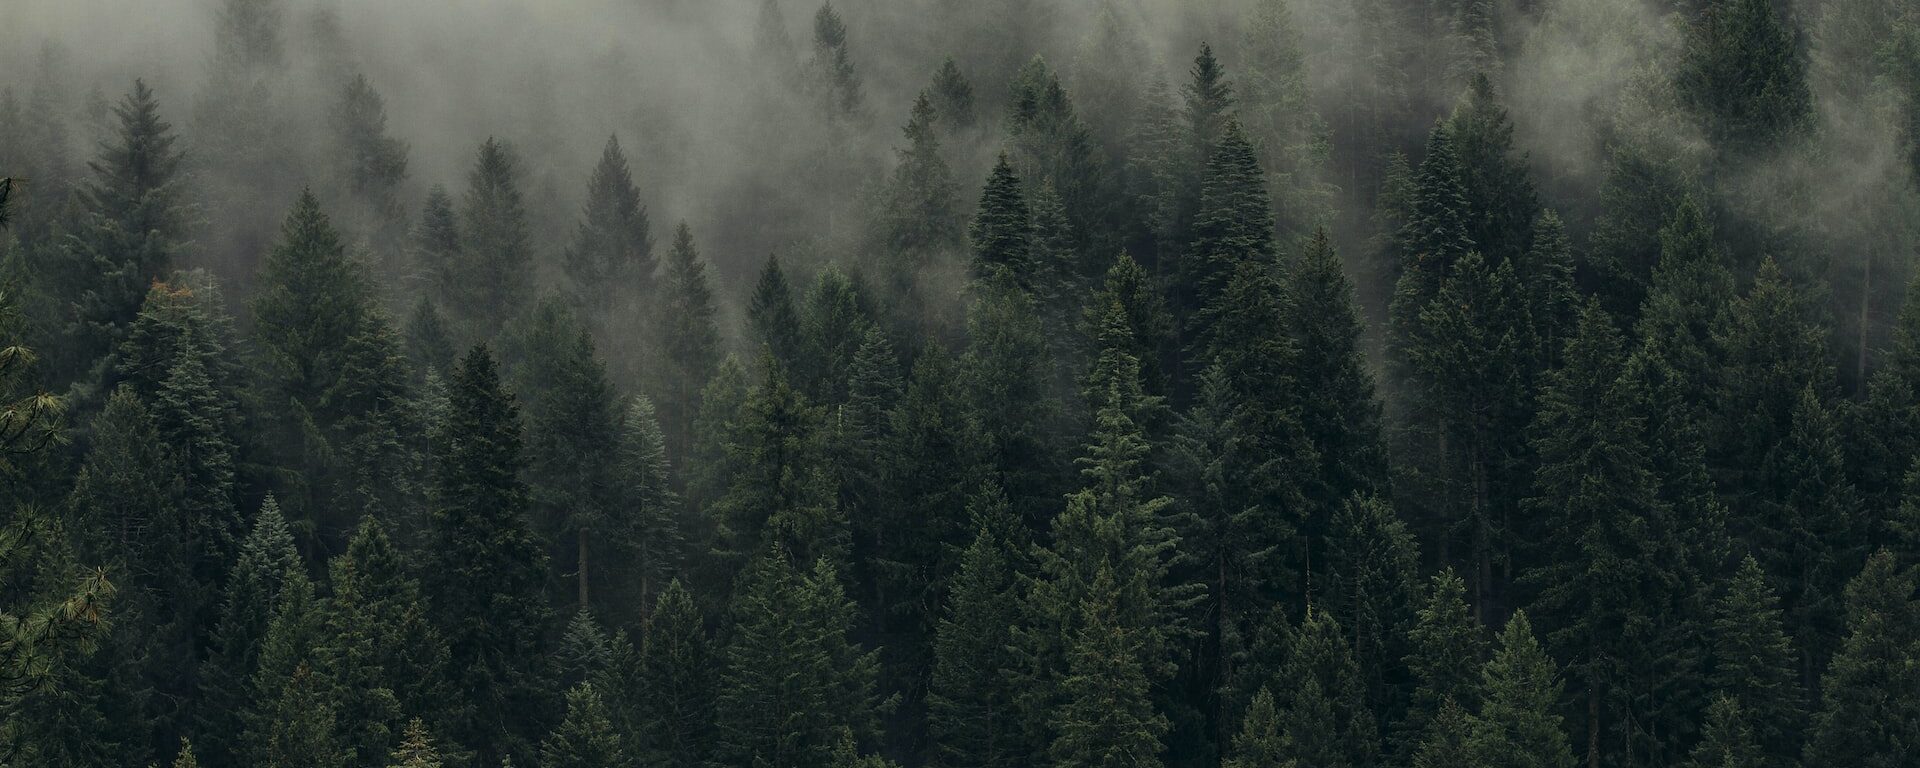 Pine trees in the fog